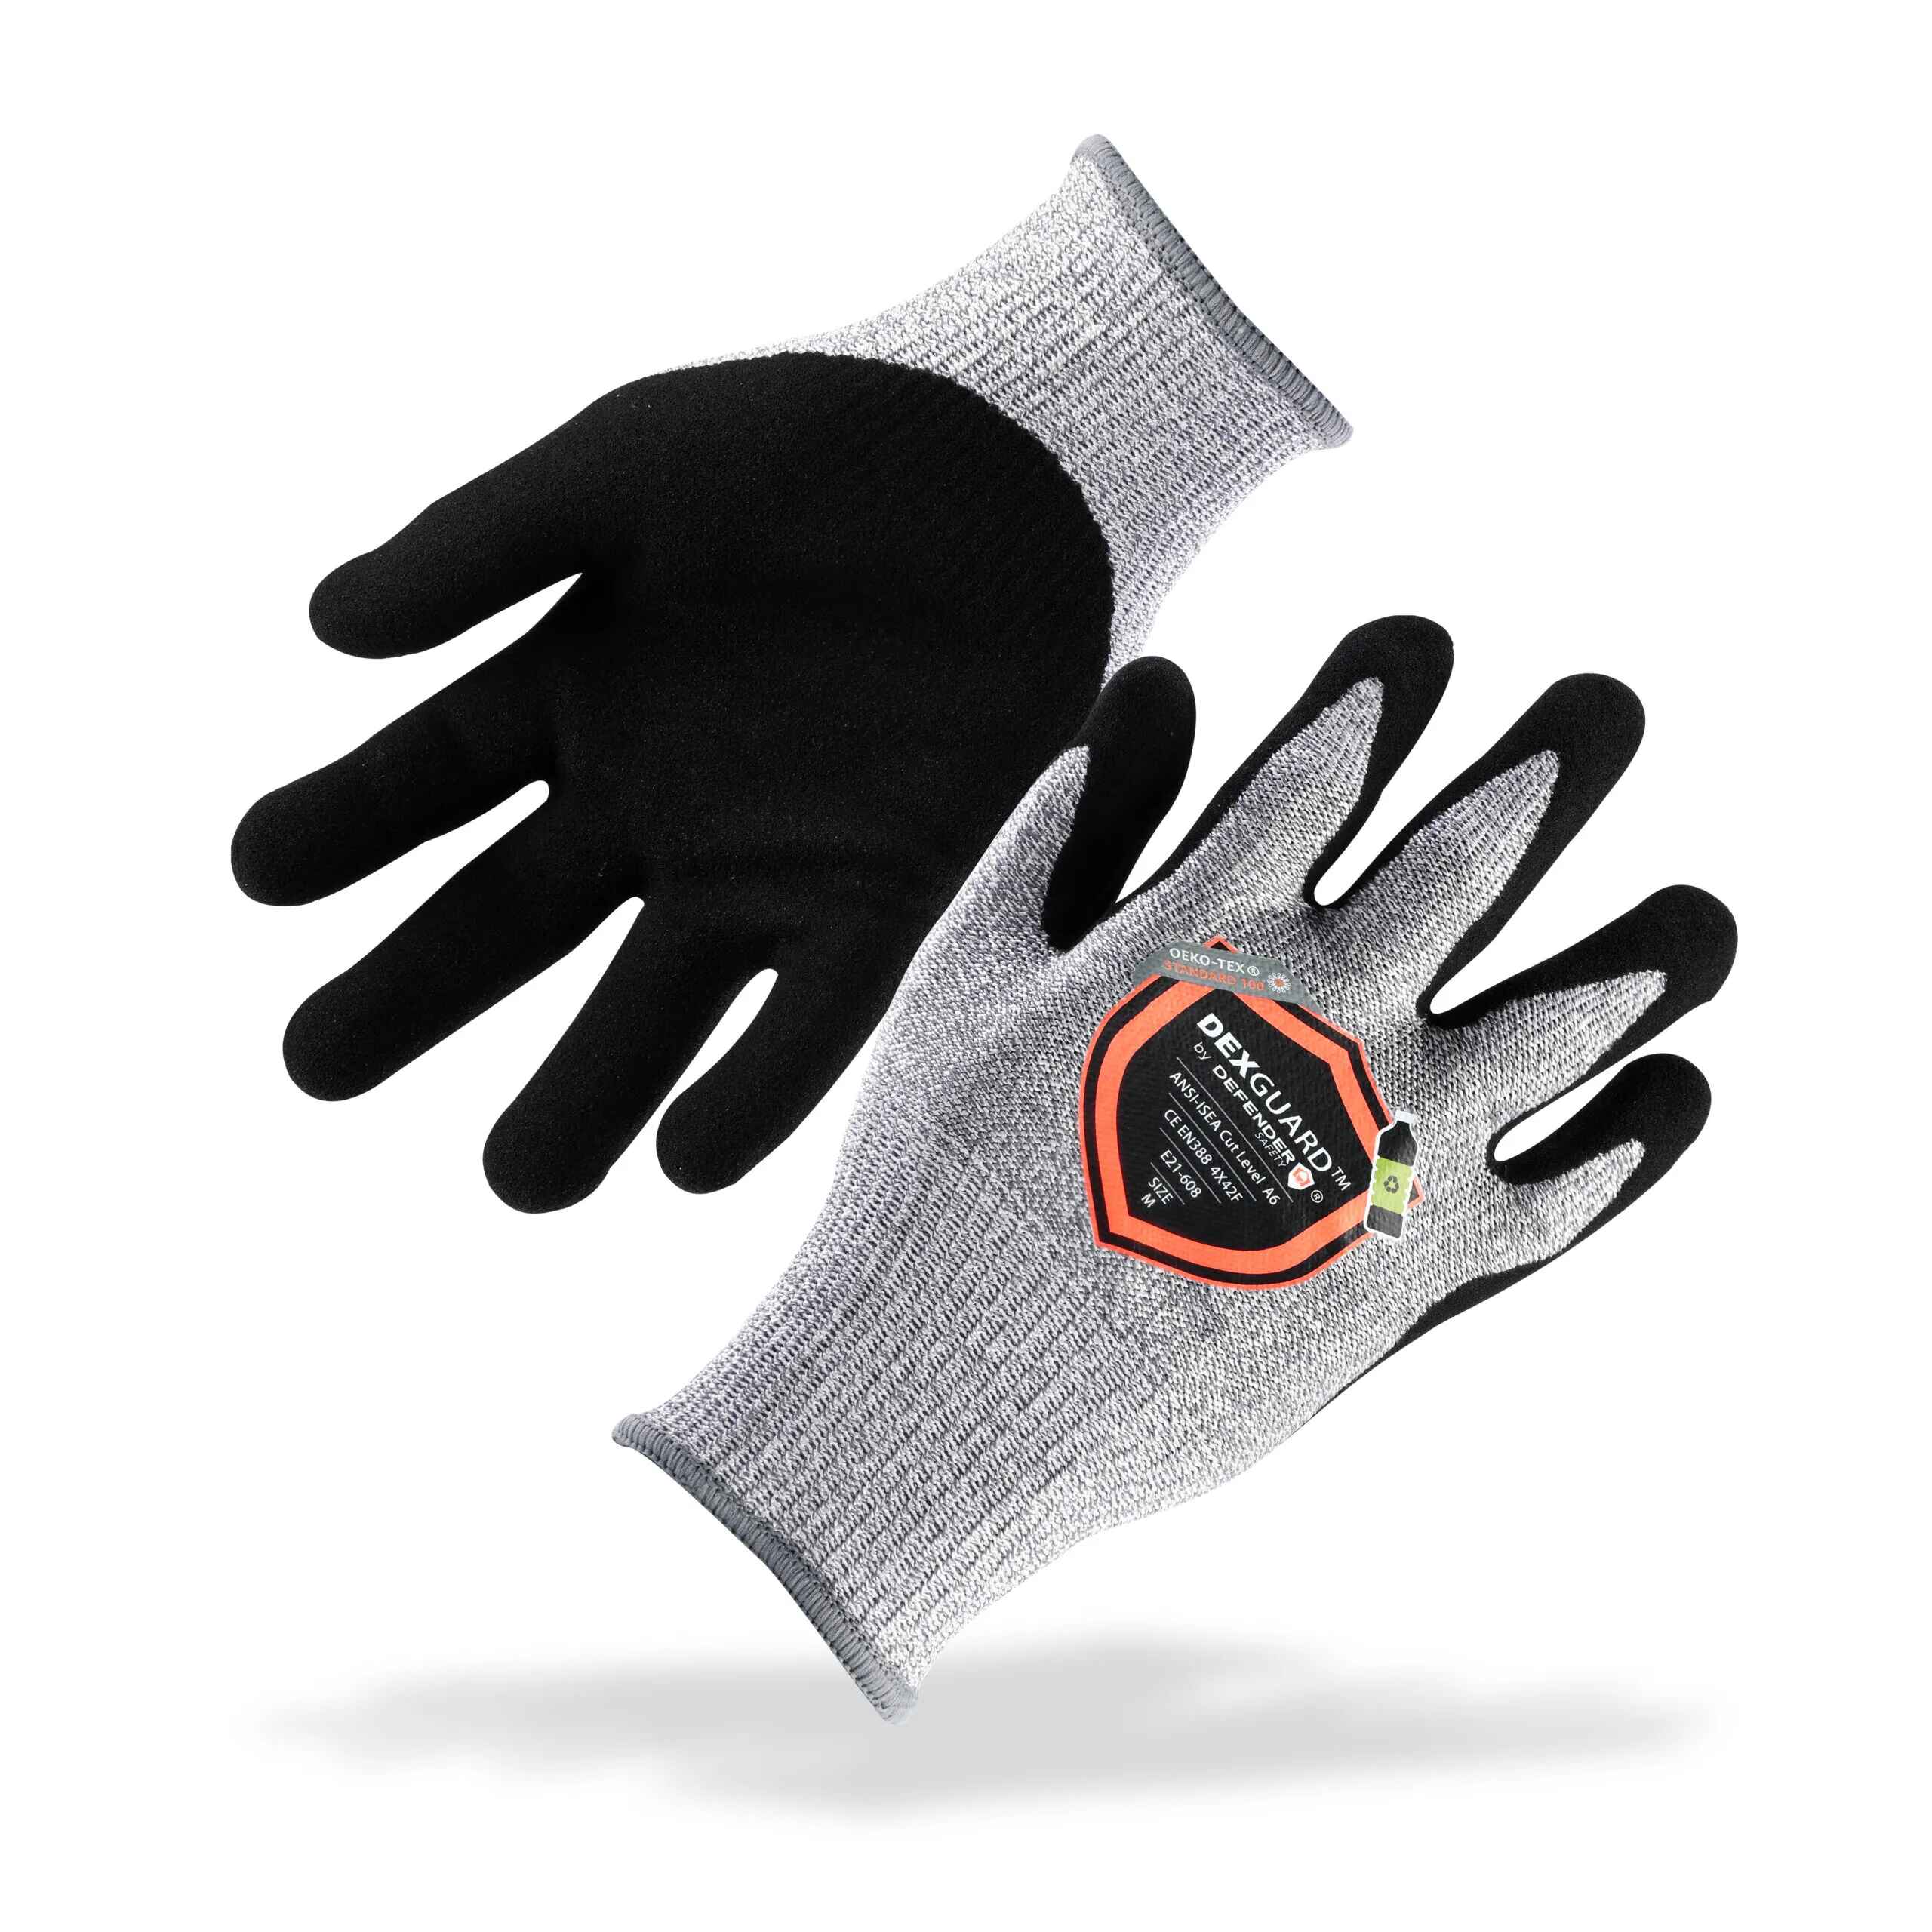 DEXGUARD™ A6 Cut Gloves, Level 4 Abrasion Resistant, Textured Nitrile Coating, Touch Screen Compatible - Defender Safety